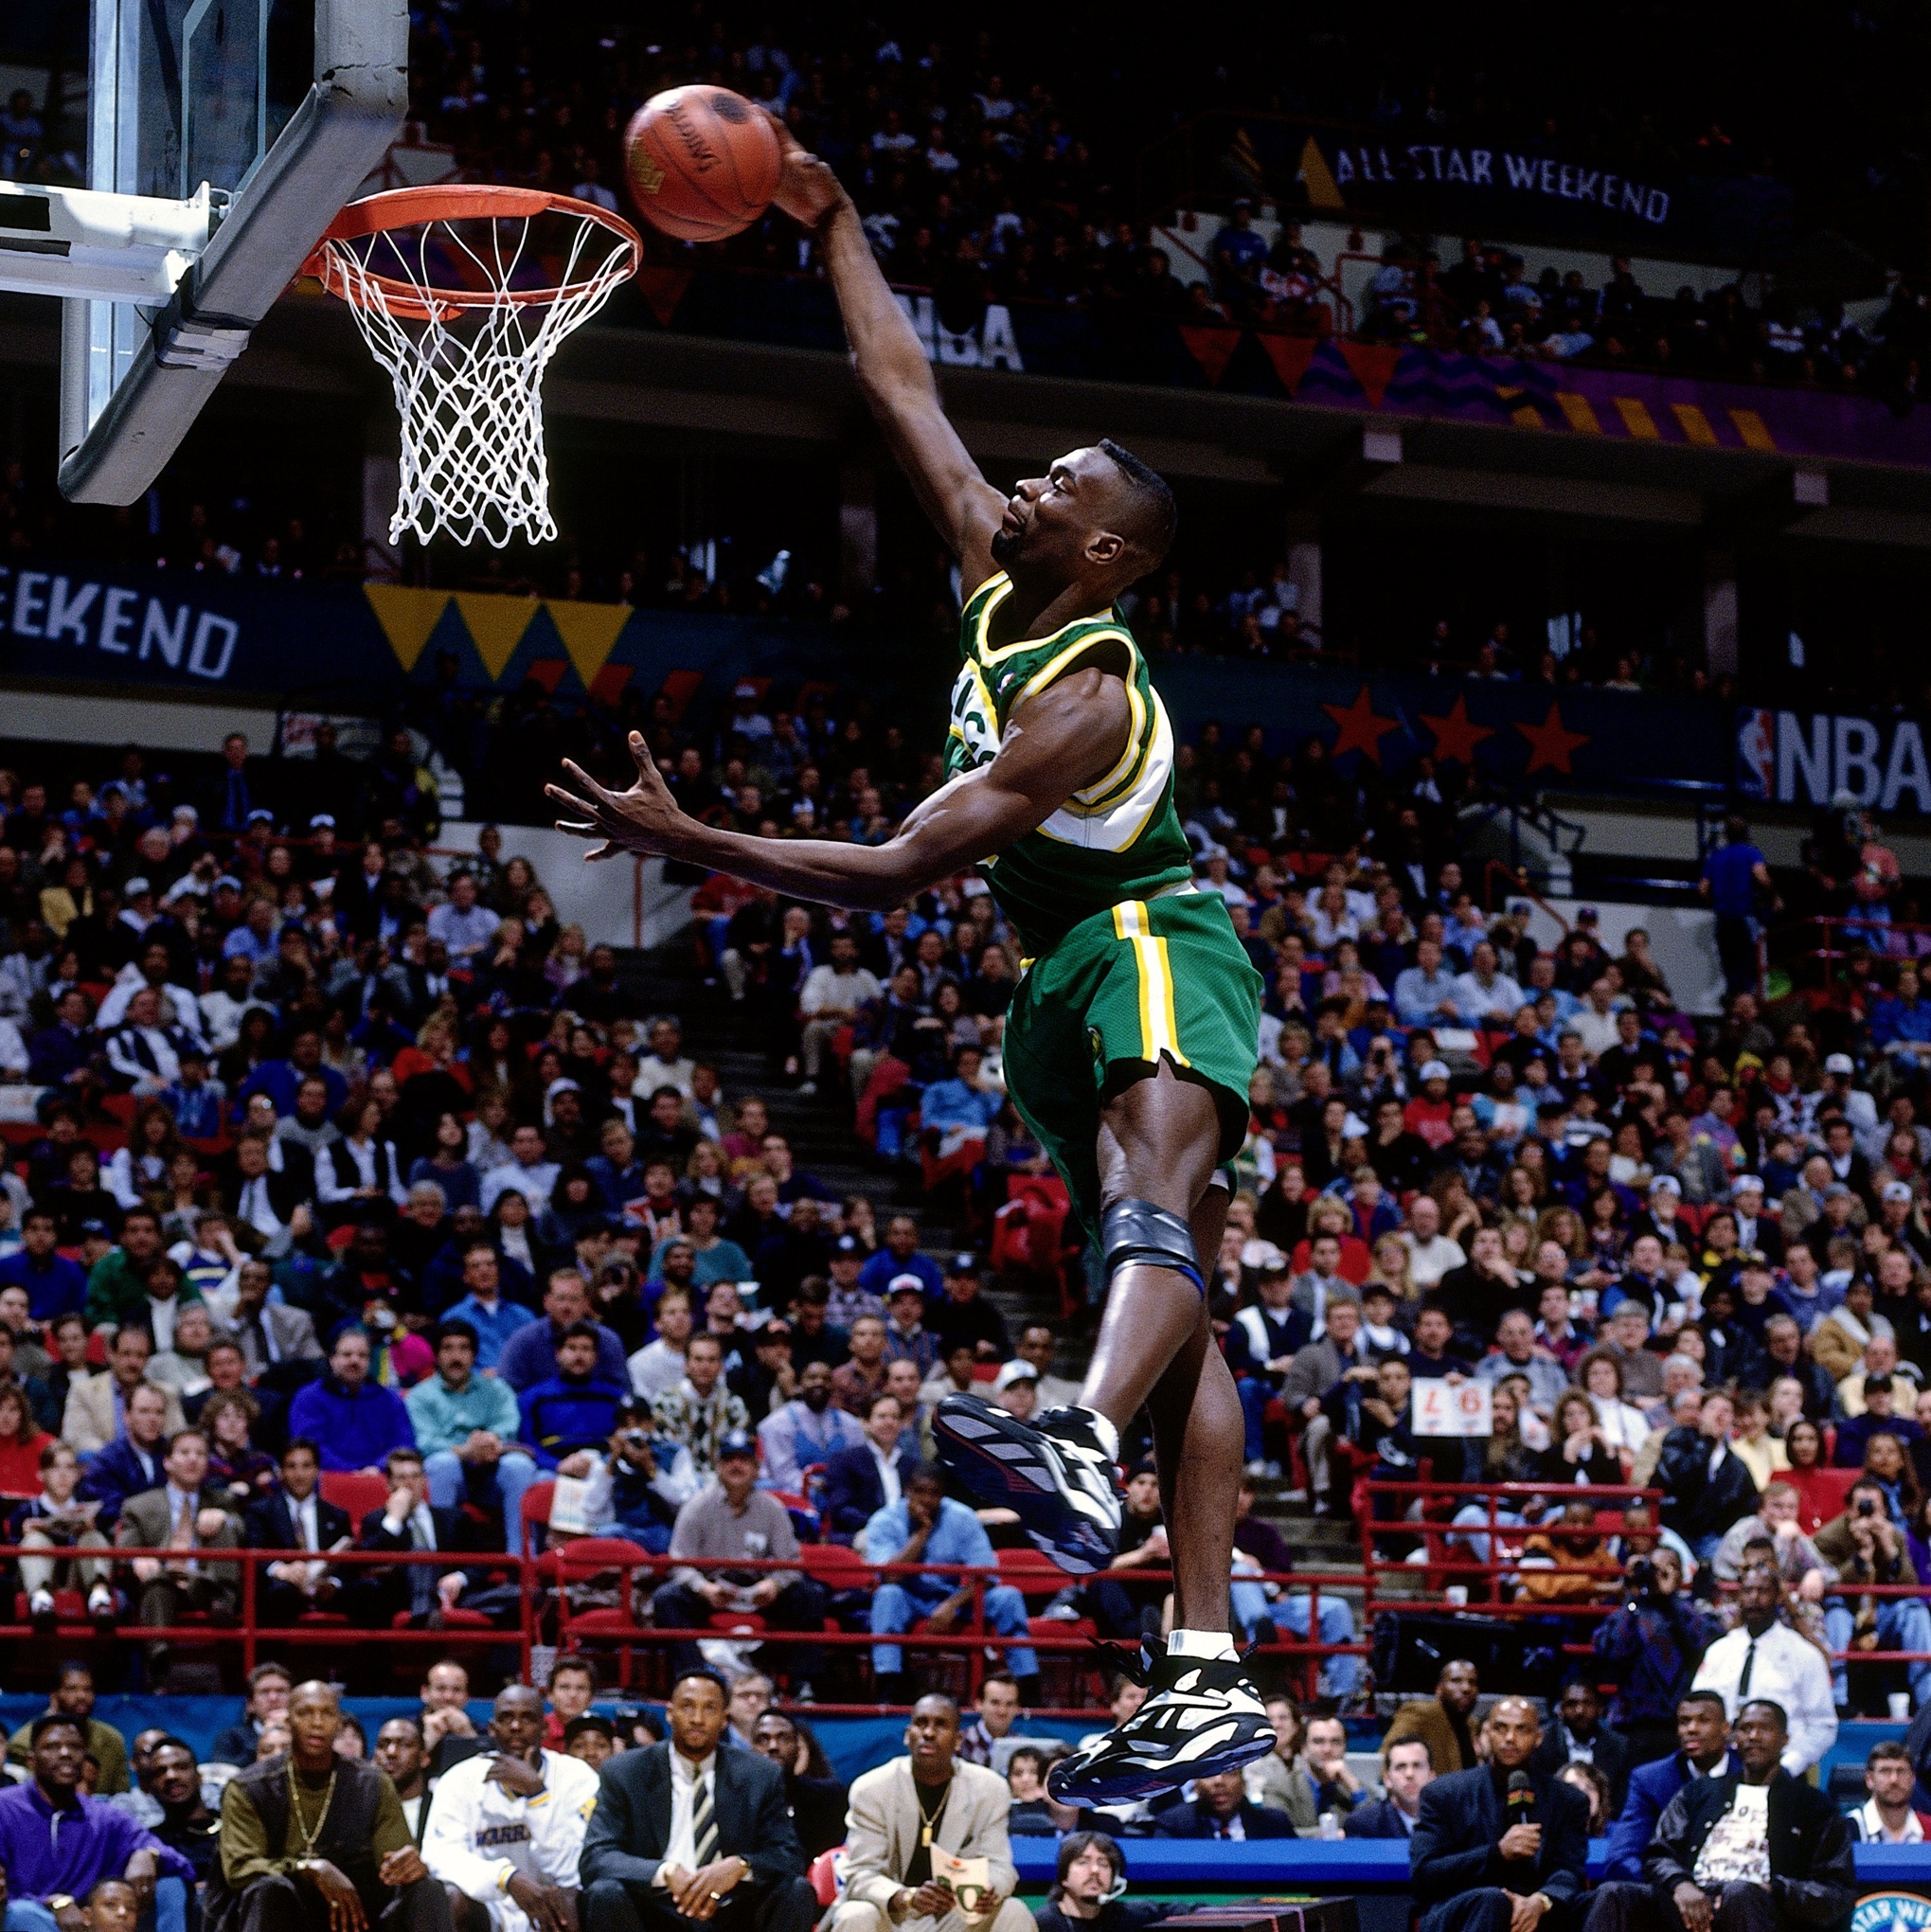 Reign of terror: Shawn Kemp, Gary Payton and the rise